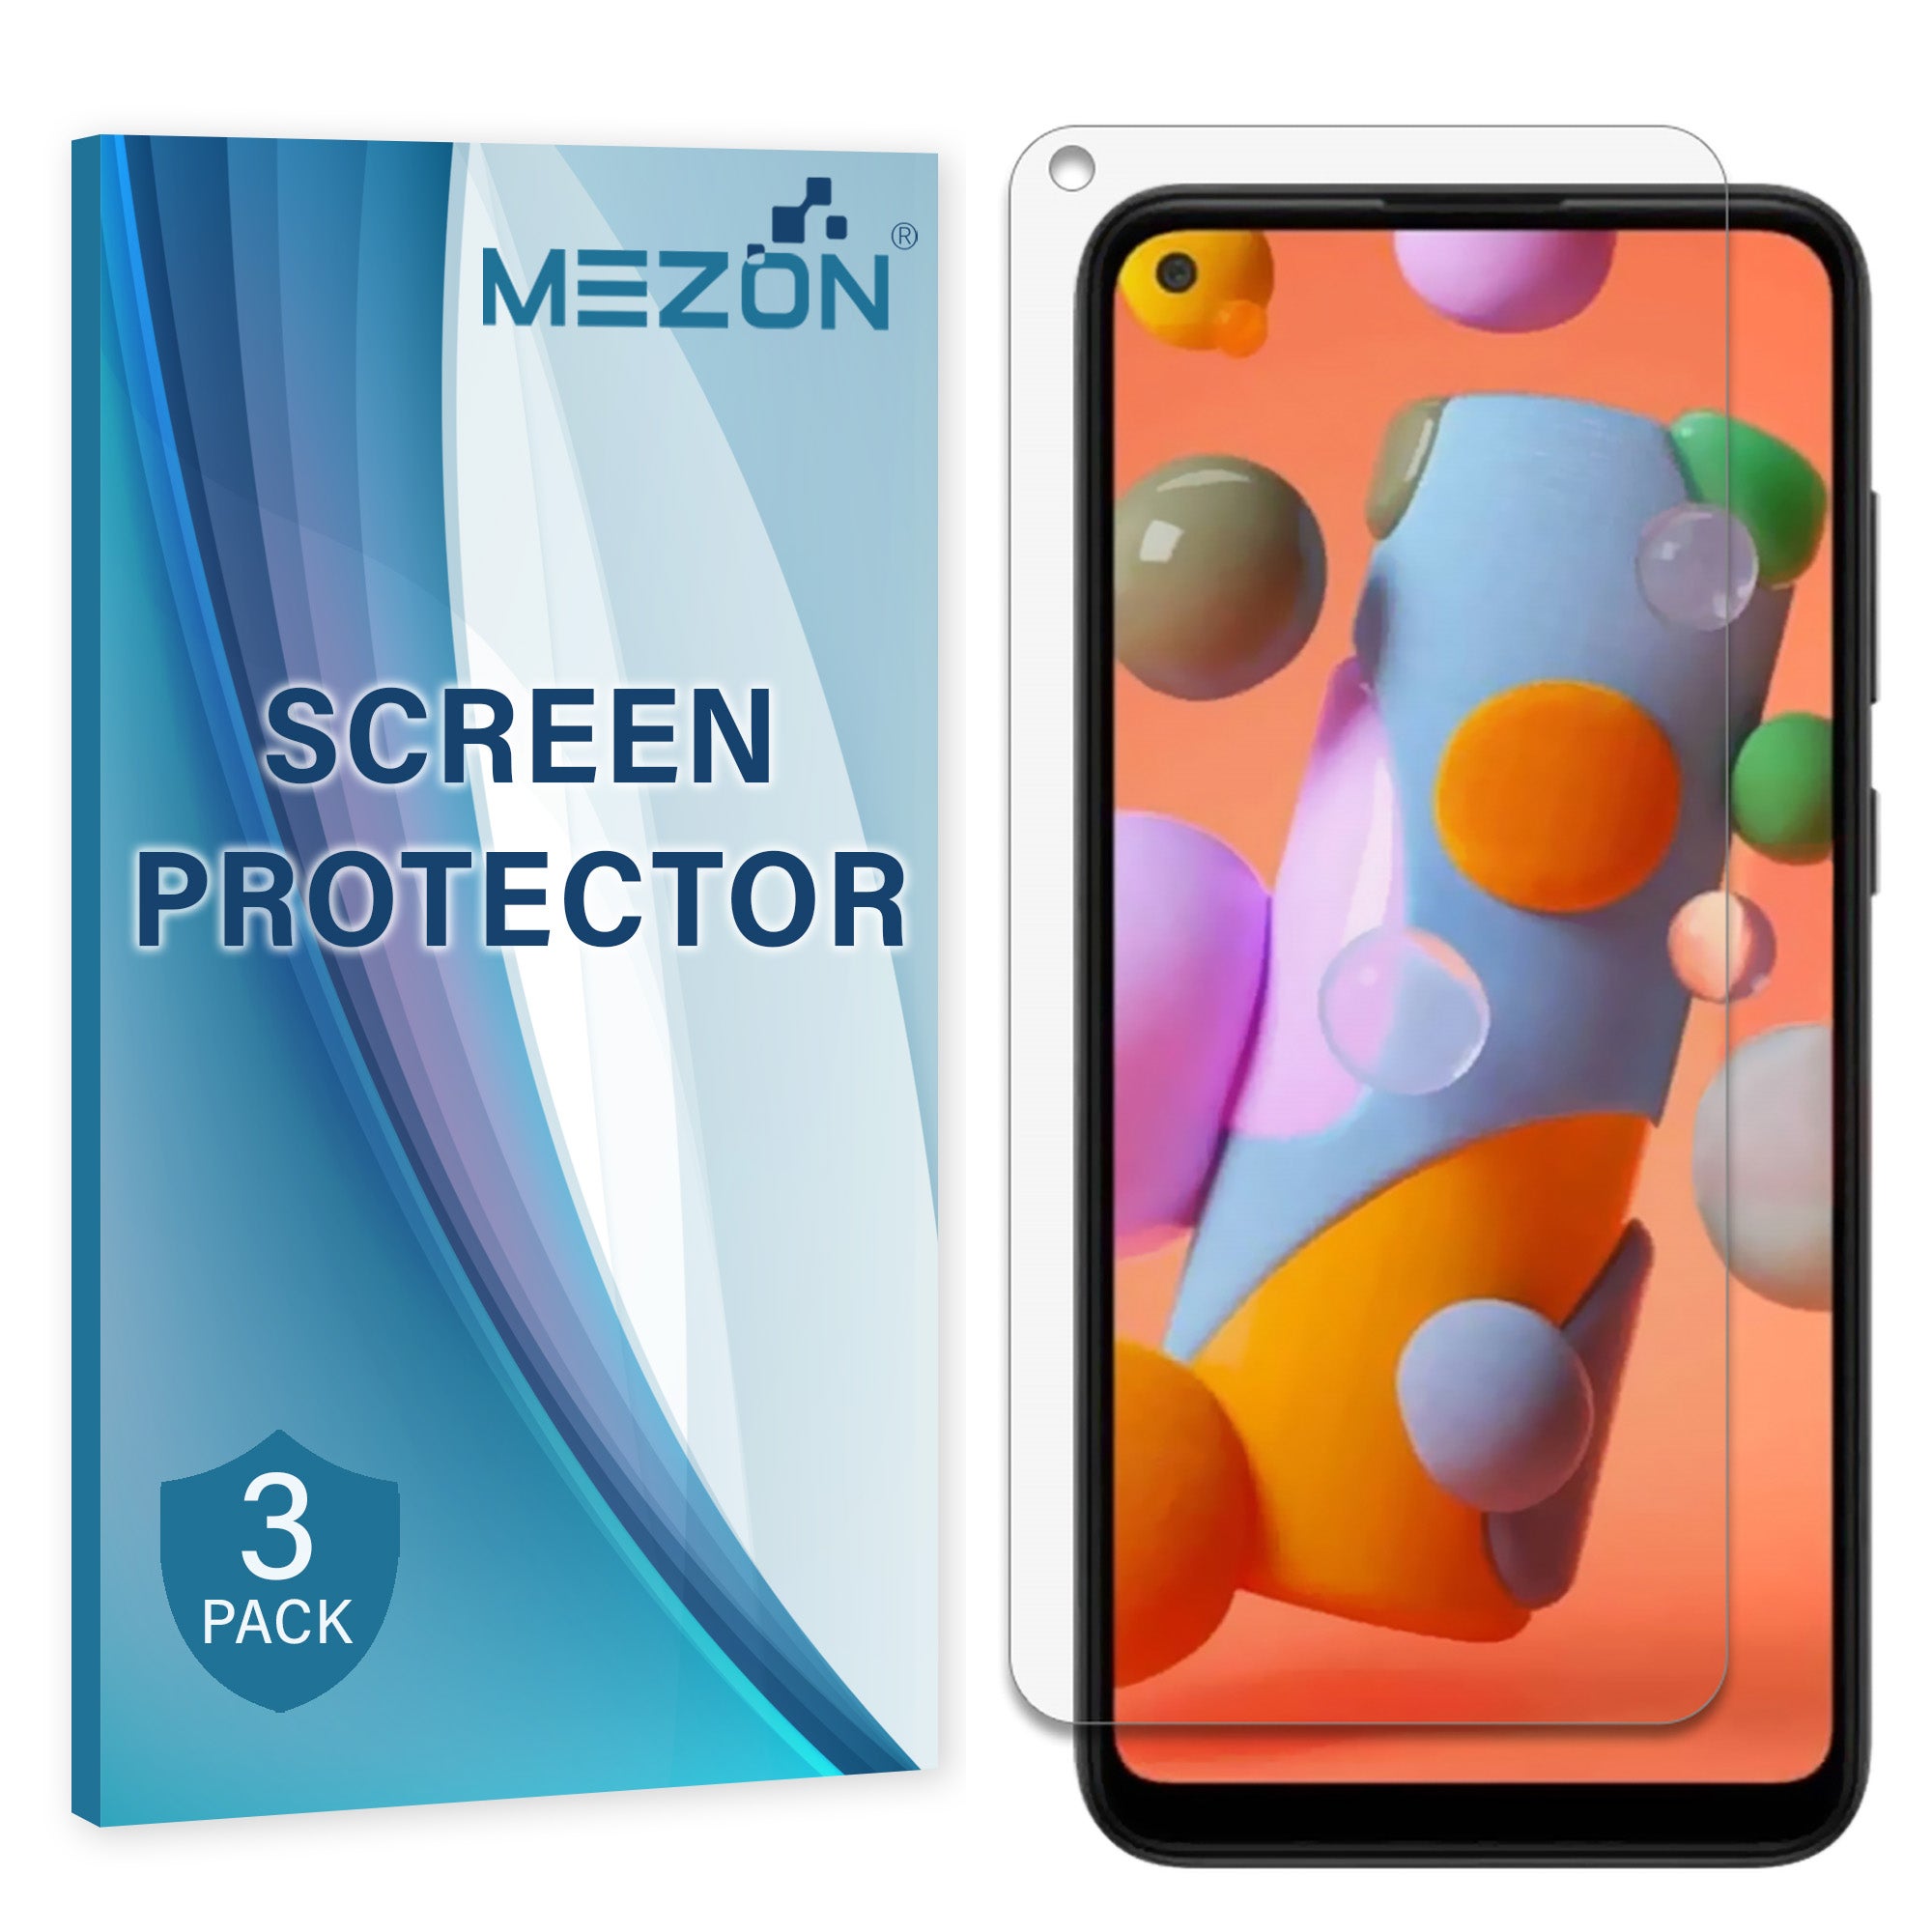 [3 Pack] Samsung Galaxy A21s Ultra Clear Screen Protector Film by MEZON – Case Friendly, Shock Absorption (A21s, Clear)